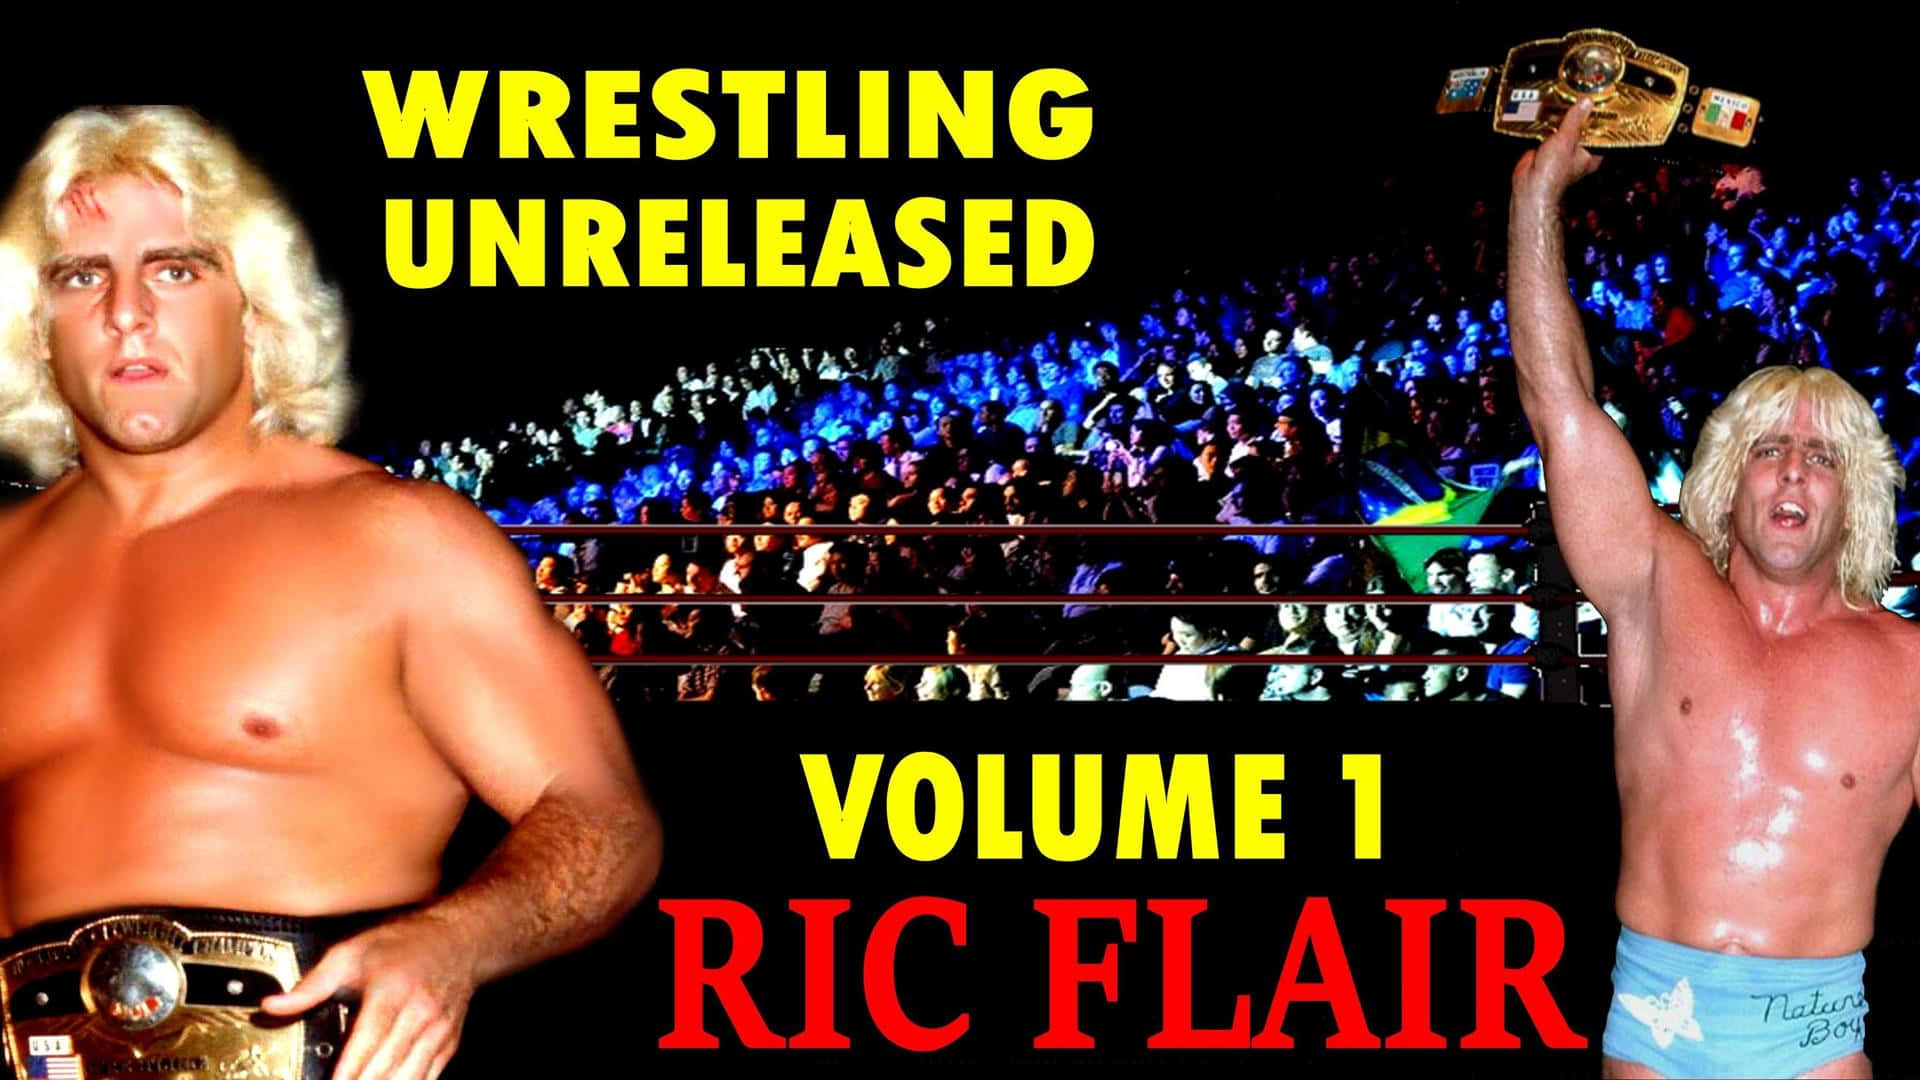 Ric Flair In His Signature Wrestling Pose Background